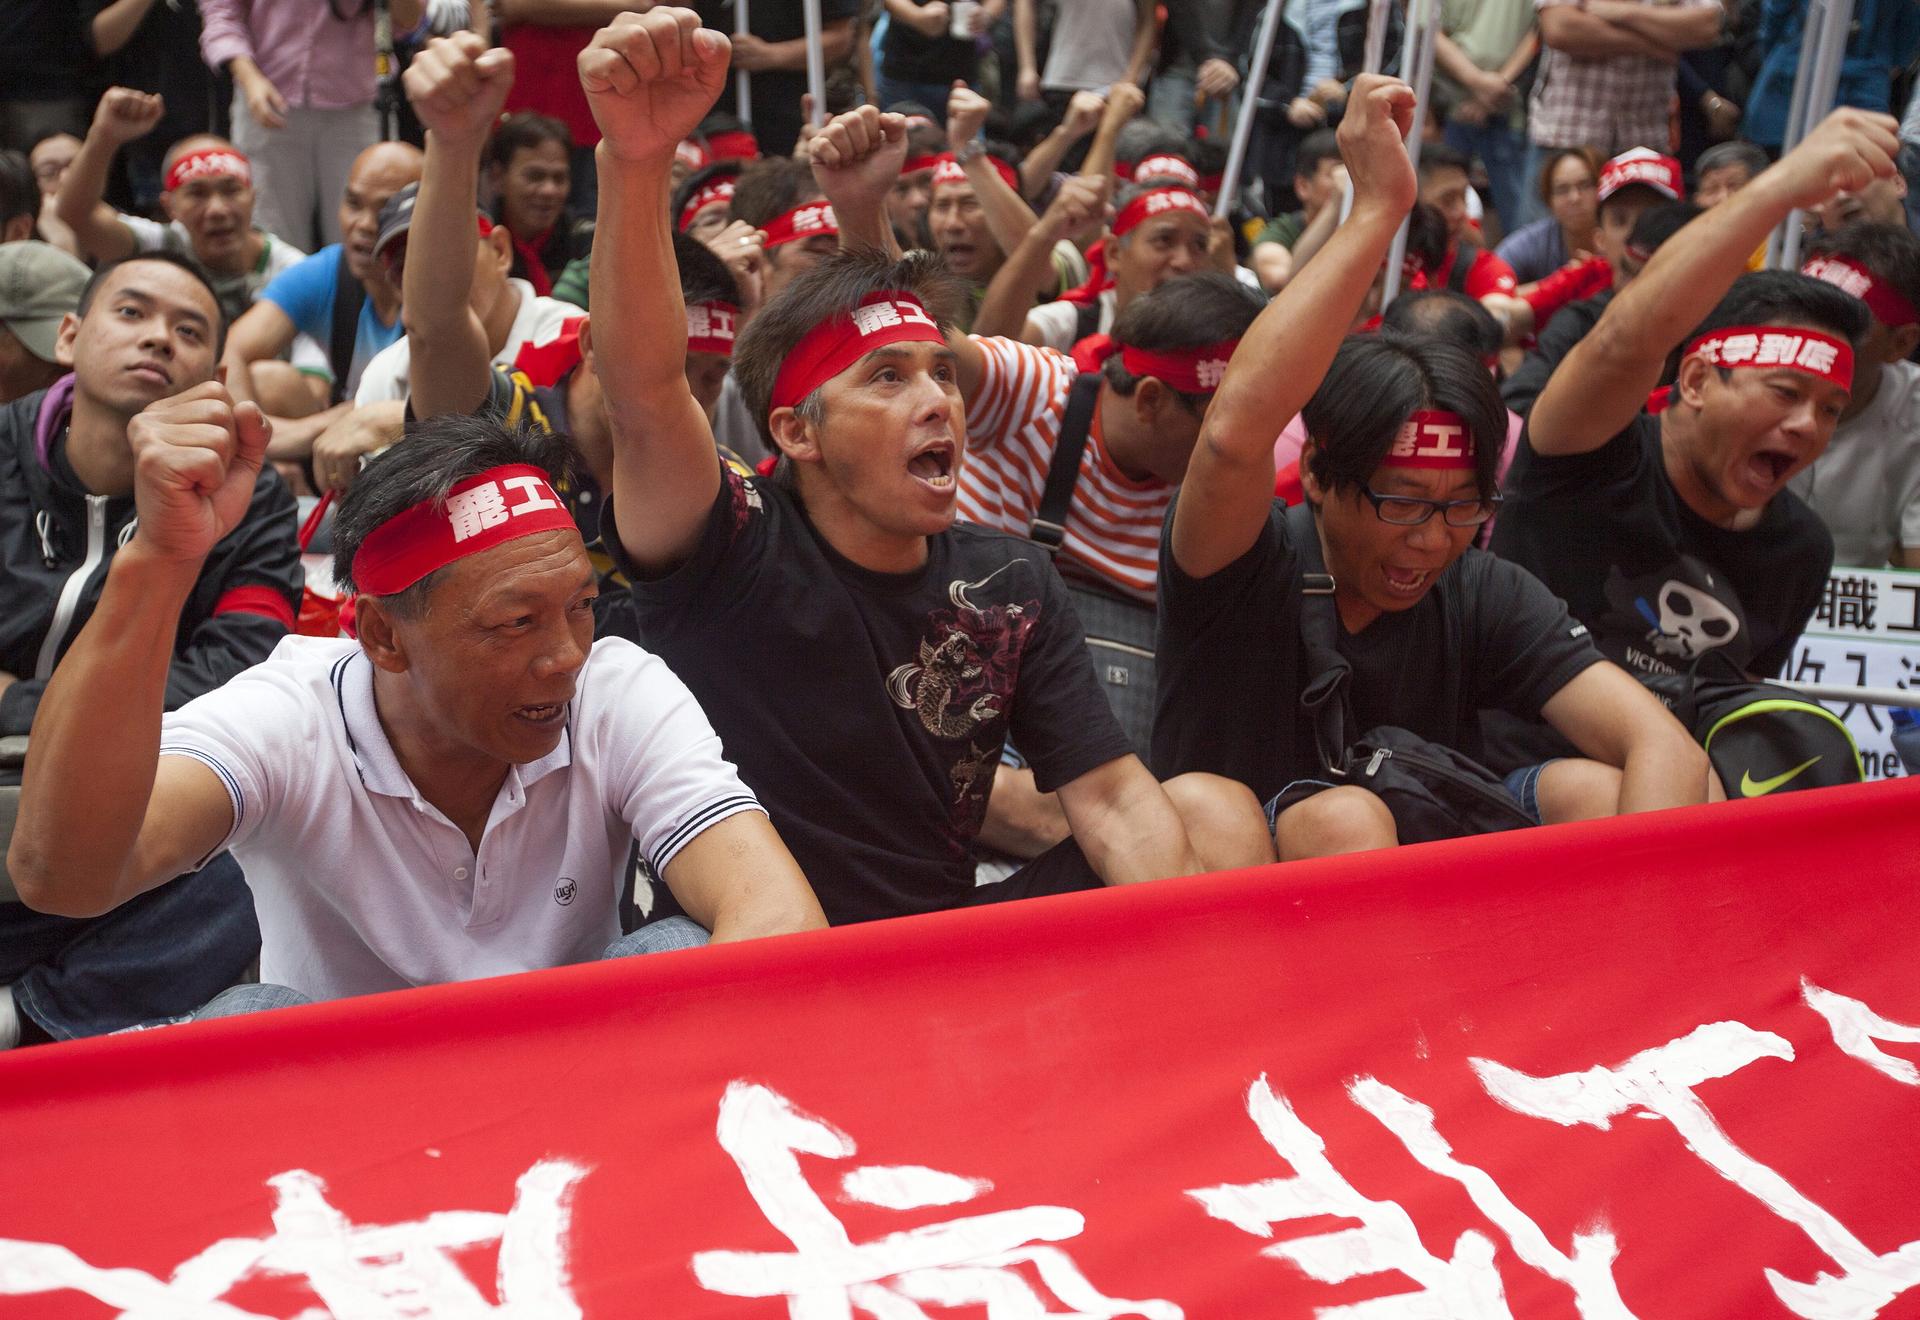 The striking dockers protest in Admiralty on May Day. Photo: EPA